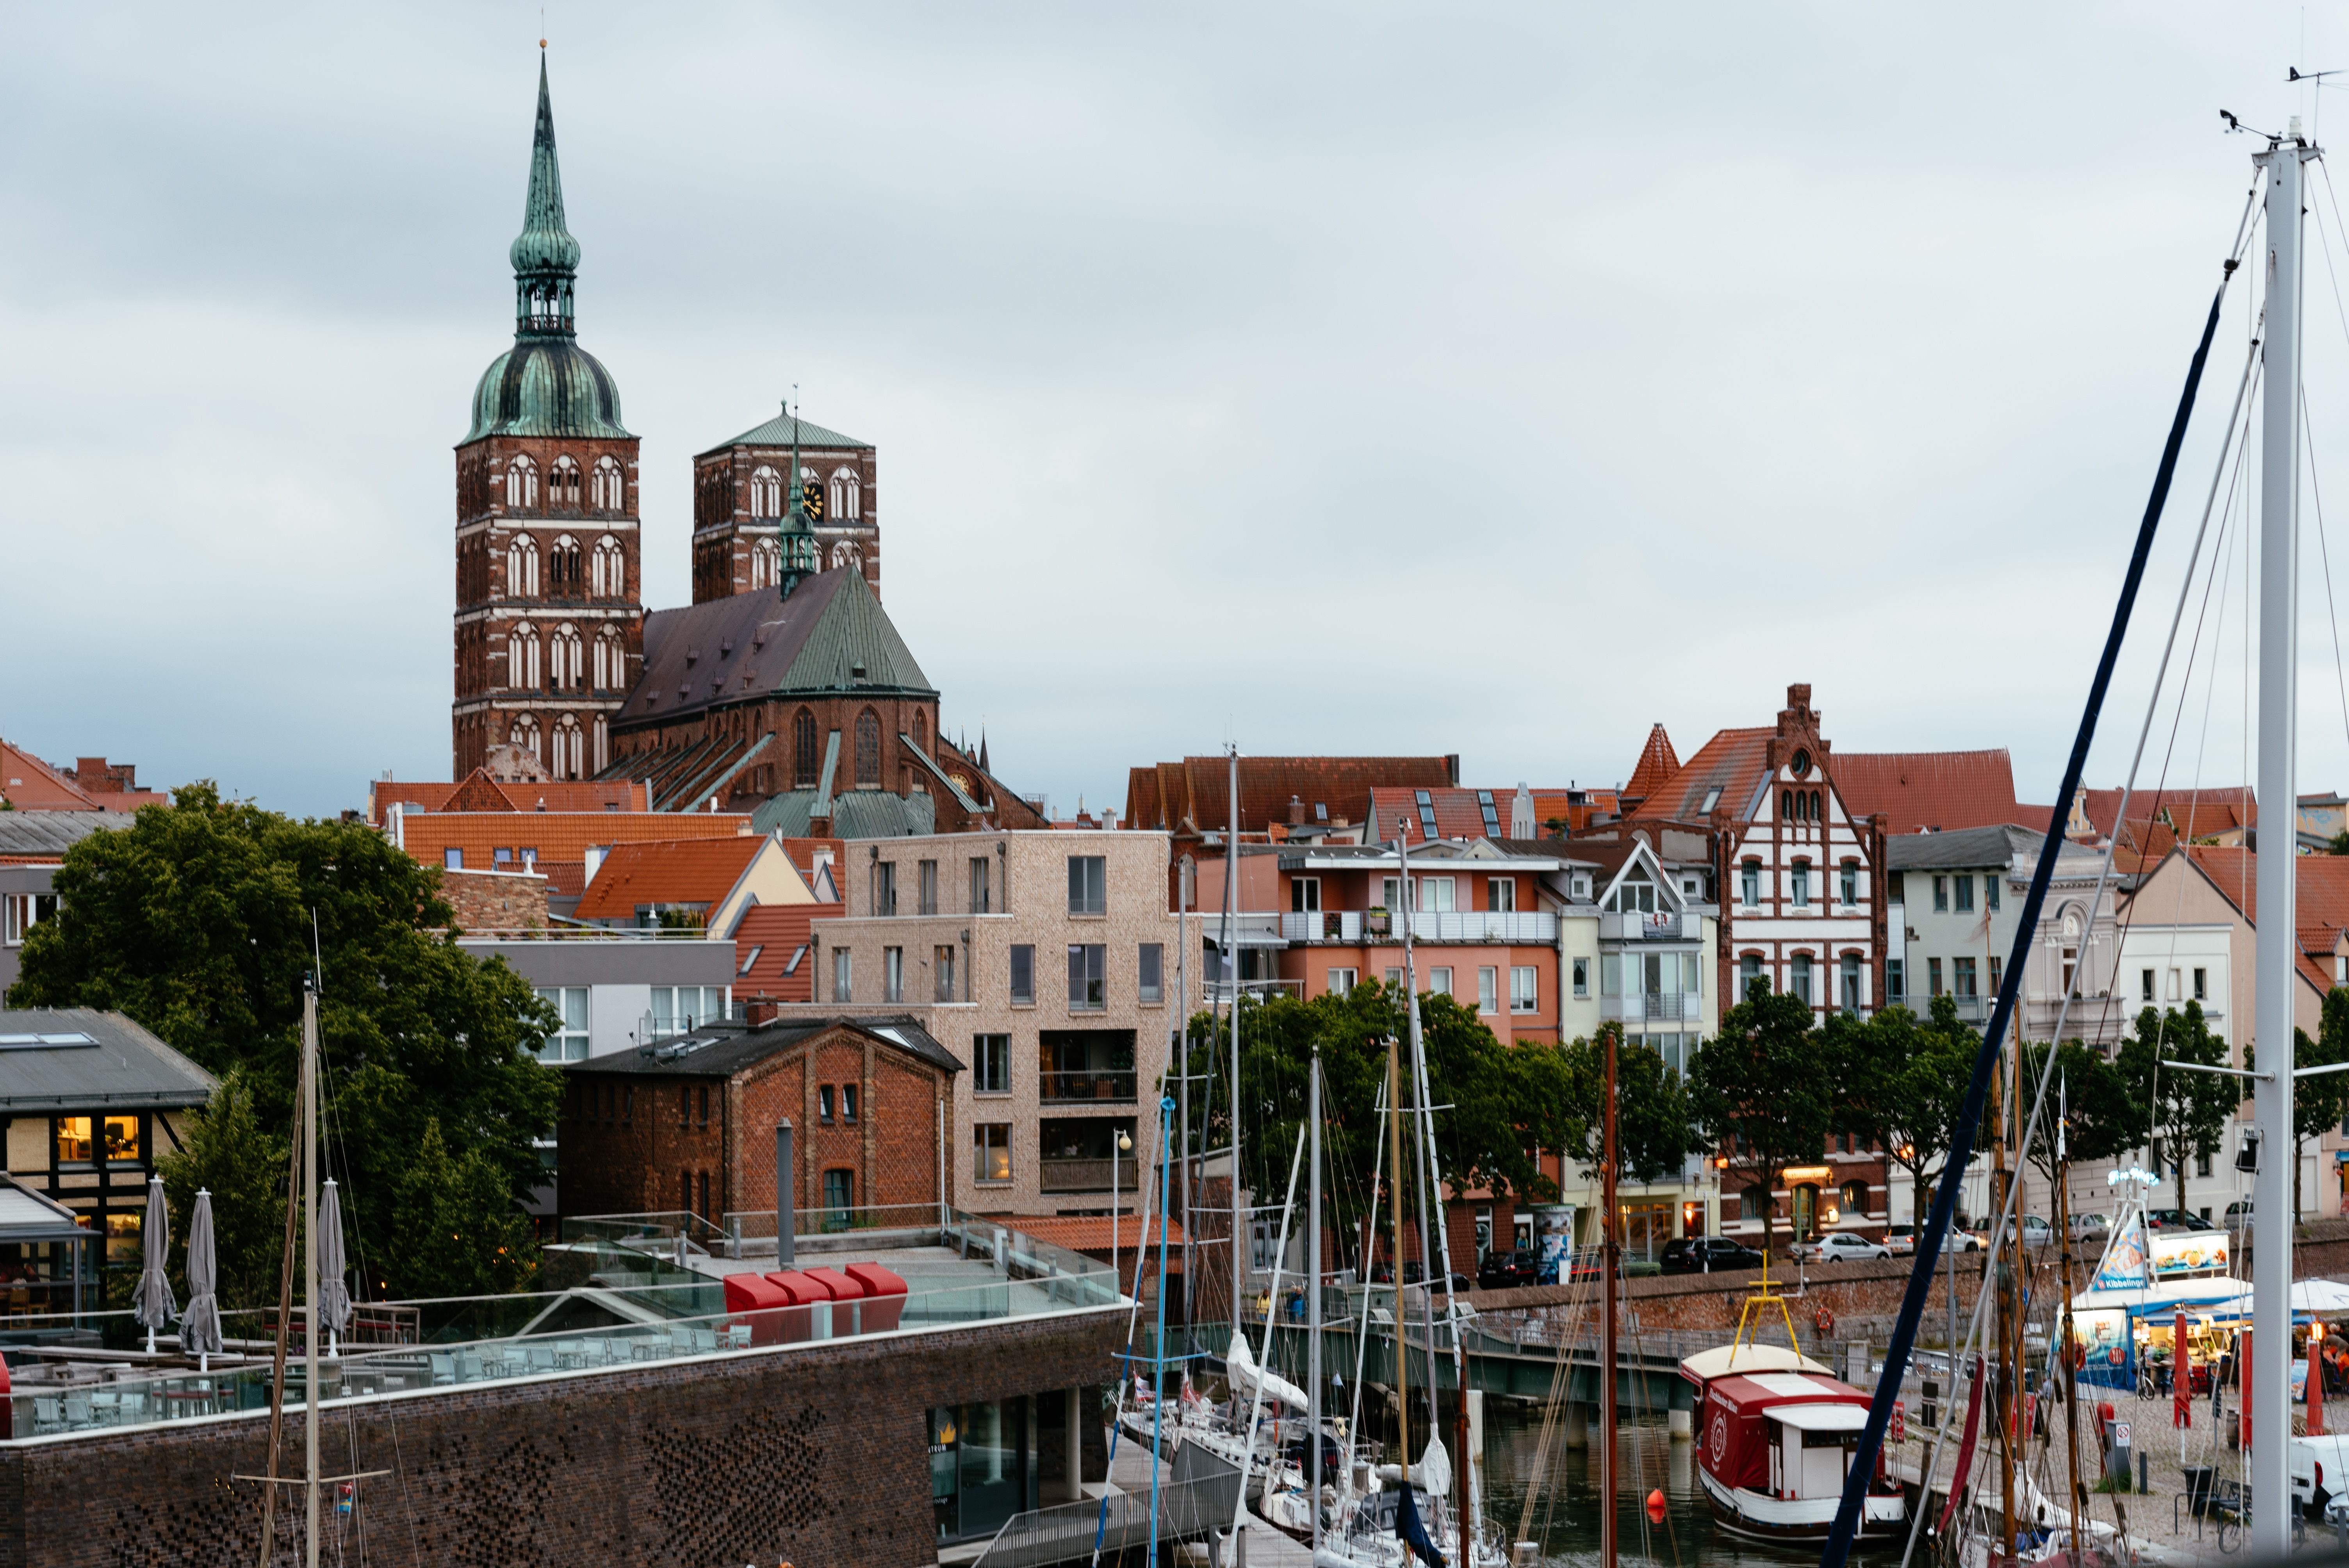 The harbour of Stralsund with boats moored